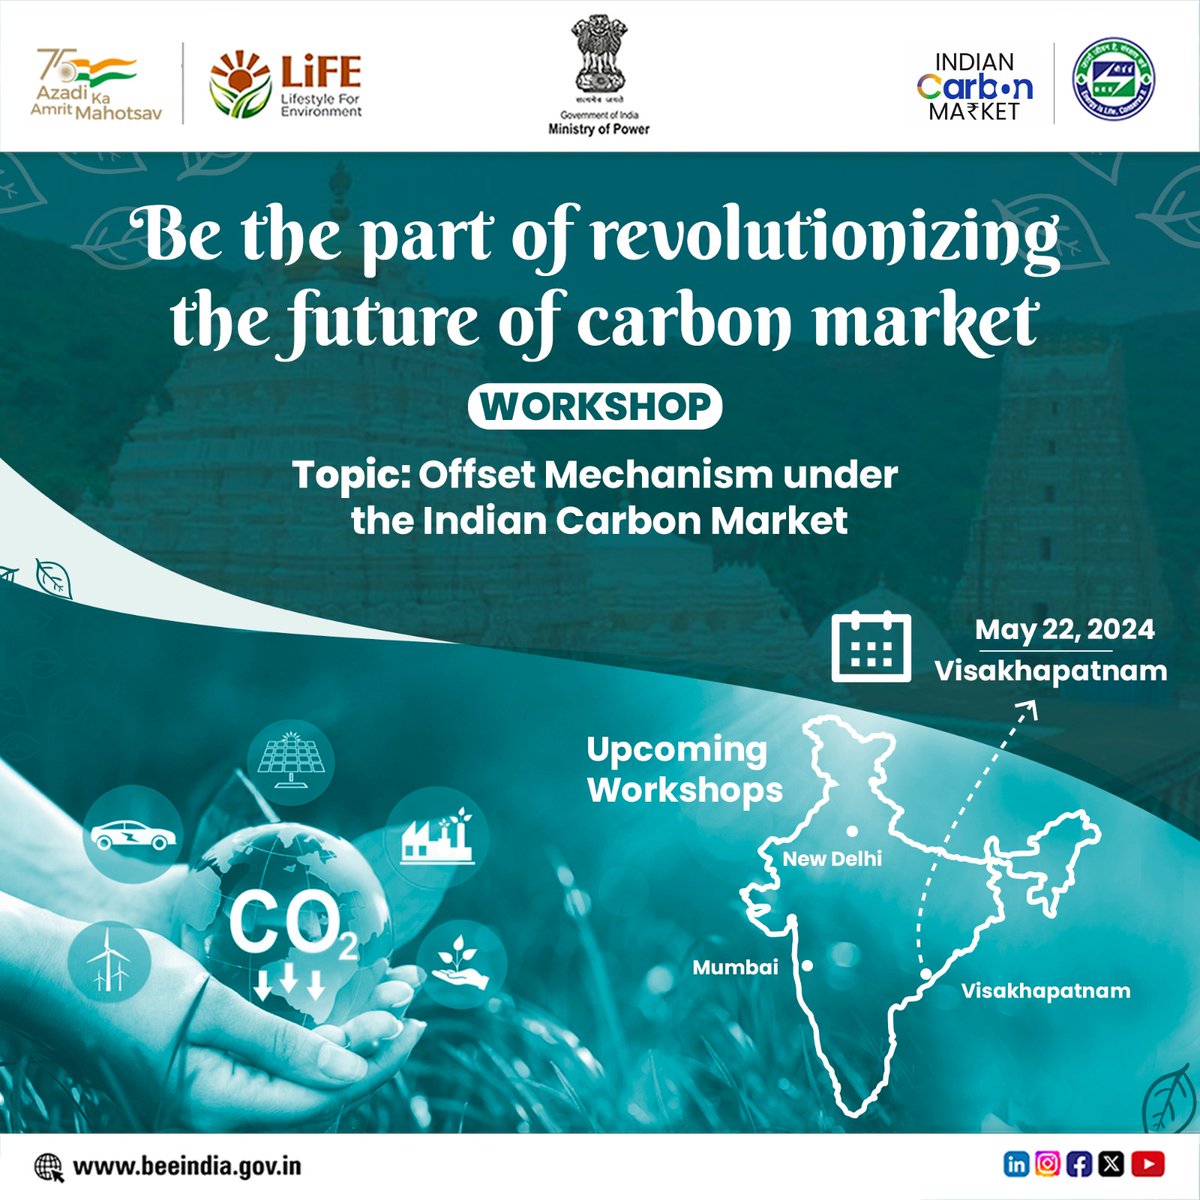 Join us for an immersive consultation on the Offset Mechanism under the Indian Carbon Market to shape tomorrow's green economy. Register now at forms.office.com/Pages/Response… and reach out to us at bee.carbonmarket@gmail.com for any inquiries.